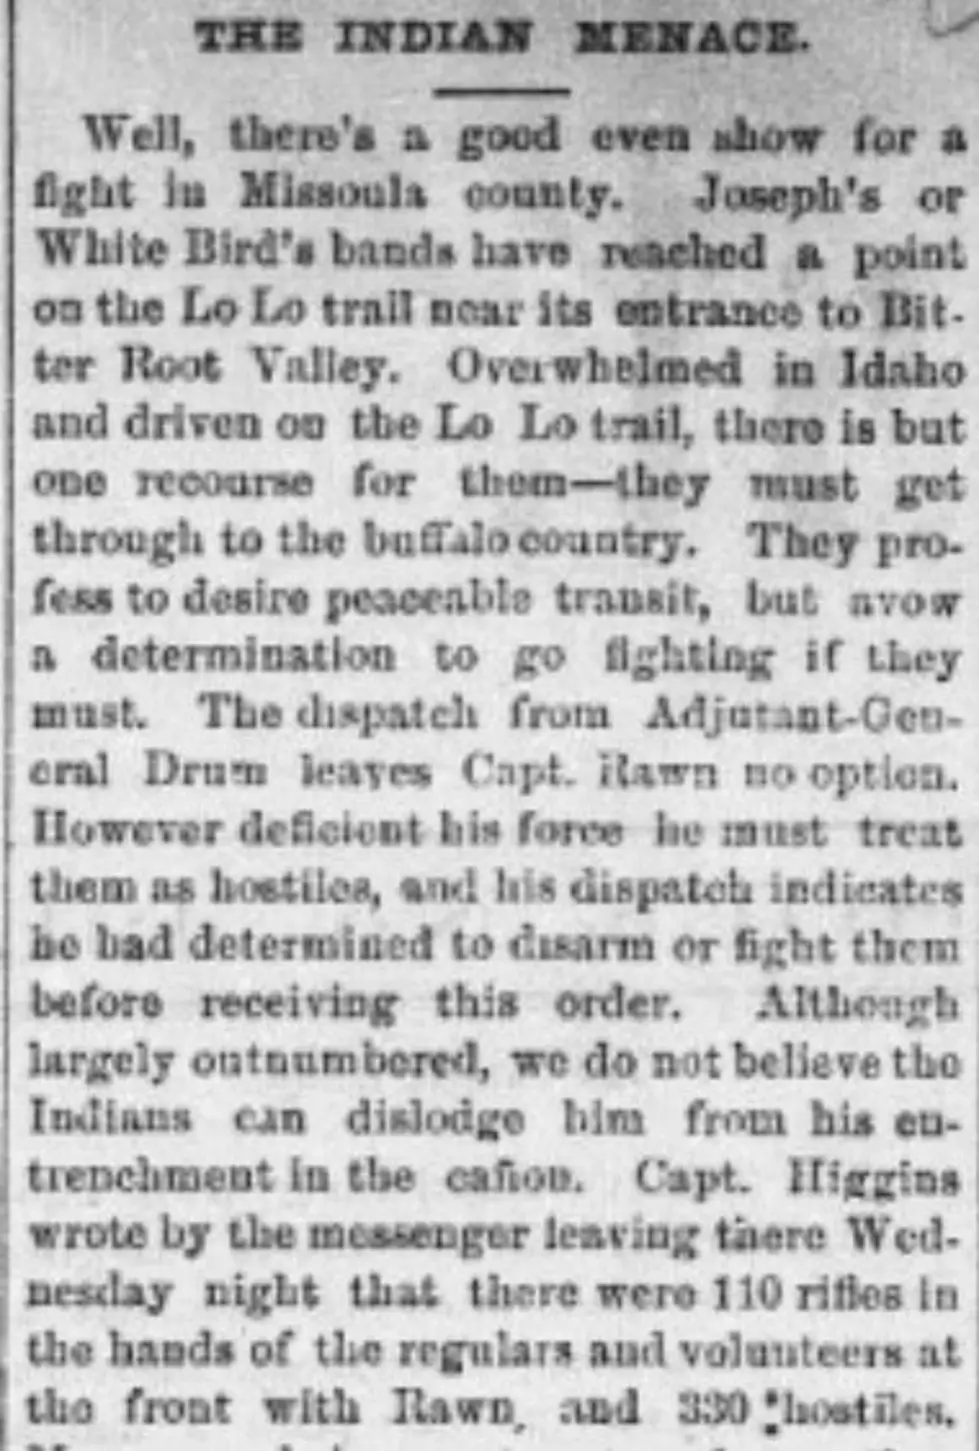 1877 editorials reflect bias, pettiness in Army&#8217;s pursuit of Nez Perce Indians